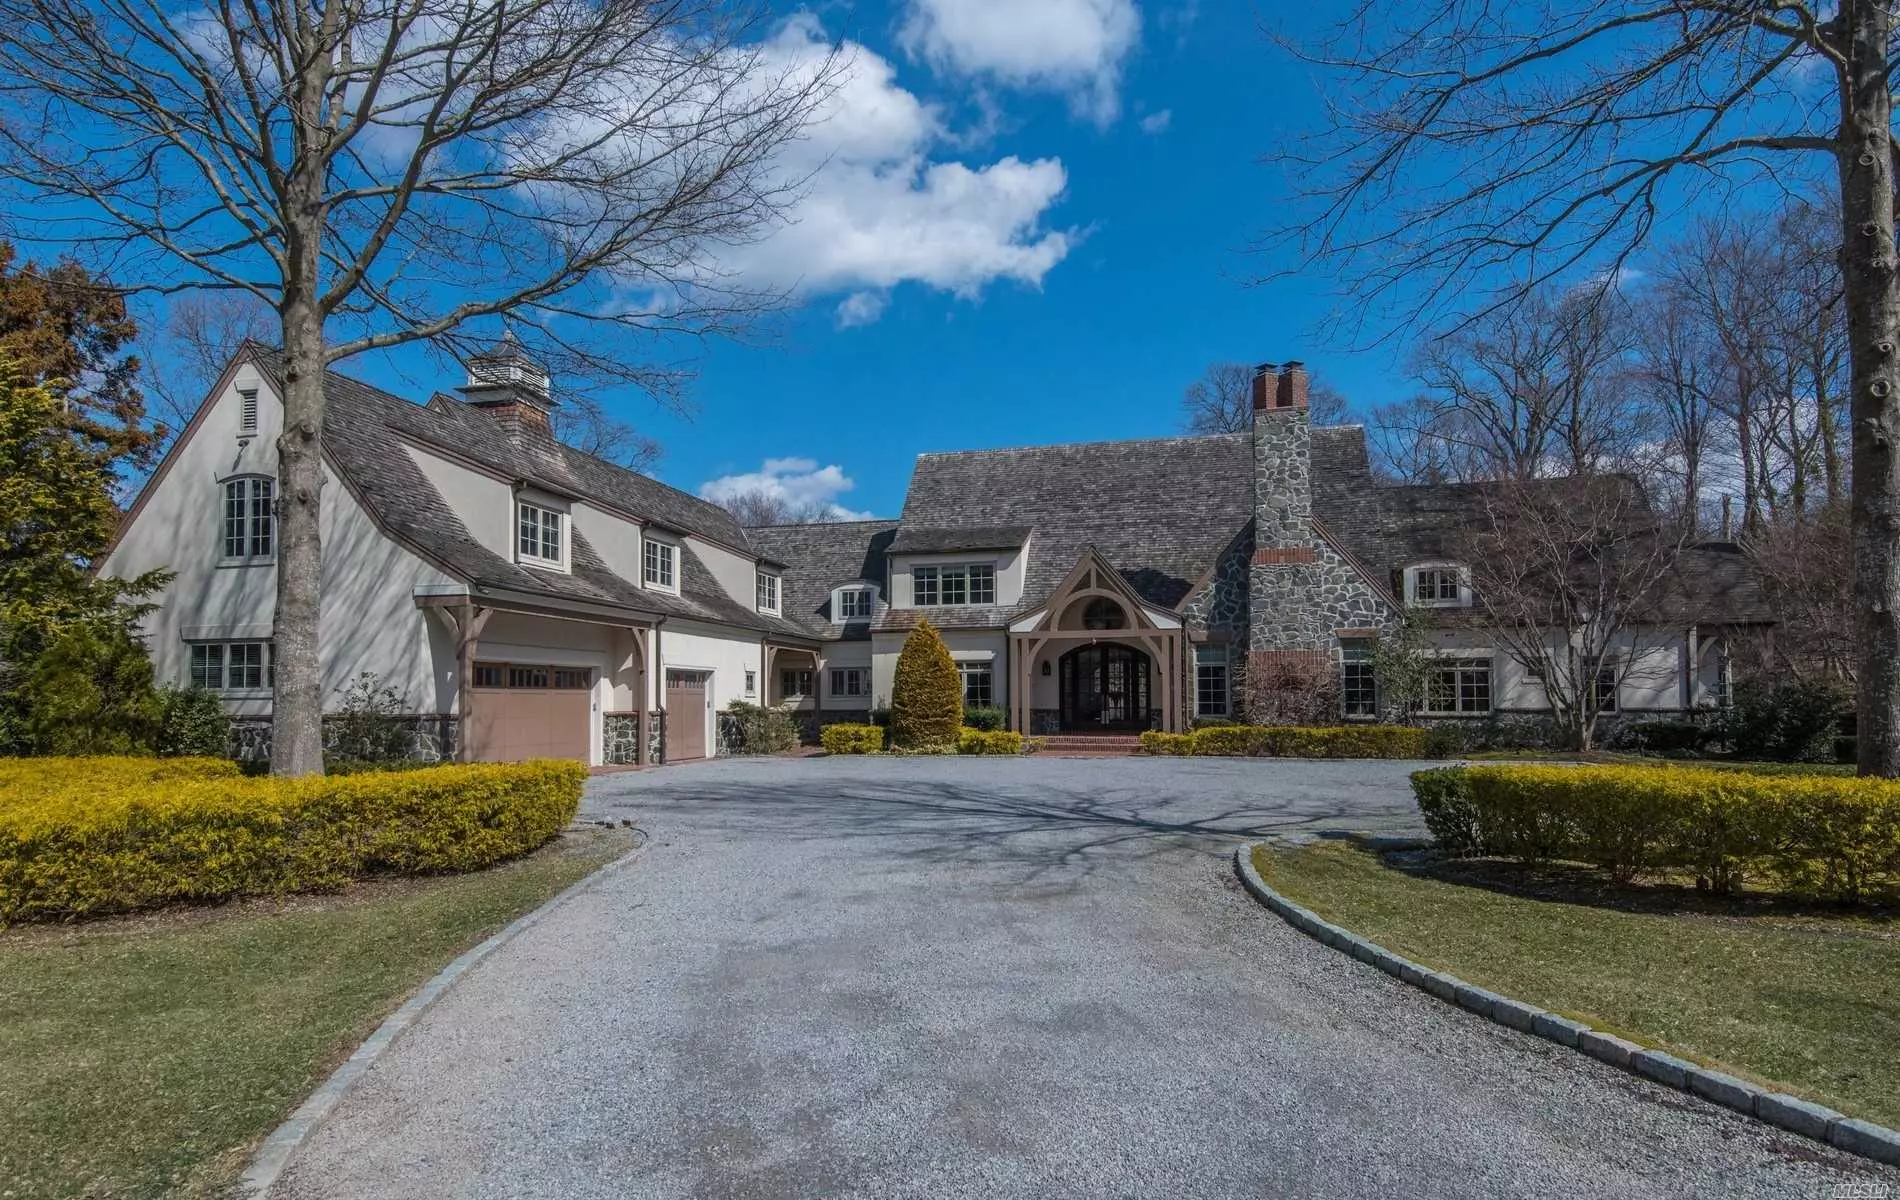 Spectacular opportunity to live in one of Old Westbury&rsquo;s finest gated estates in the most desired section of Round Hill. Oversized rooms with natural light, soaring ceilings and the highest level of workmanship. Boasting 2 Mstr suites, guest wing, pool, & sport court.Close to private schools and country clubs.